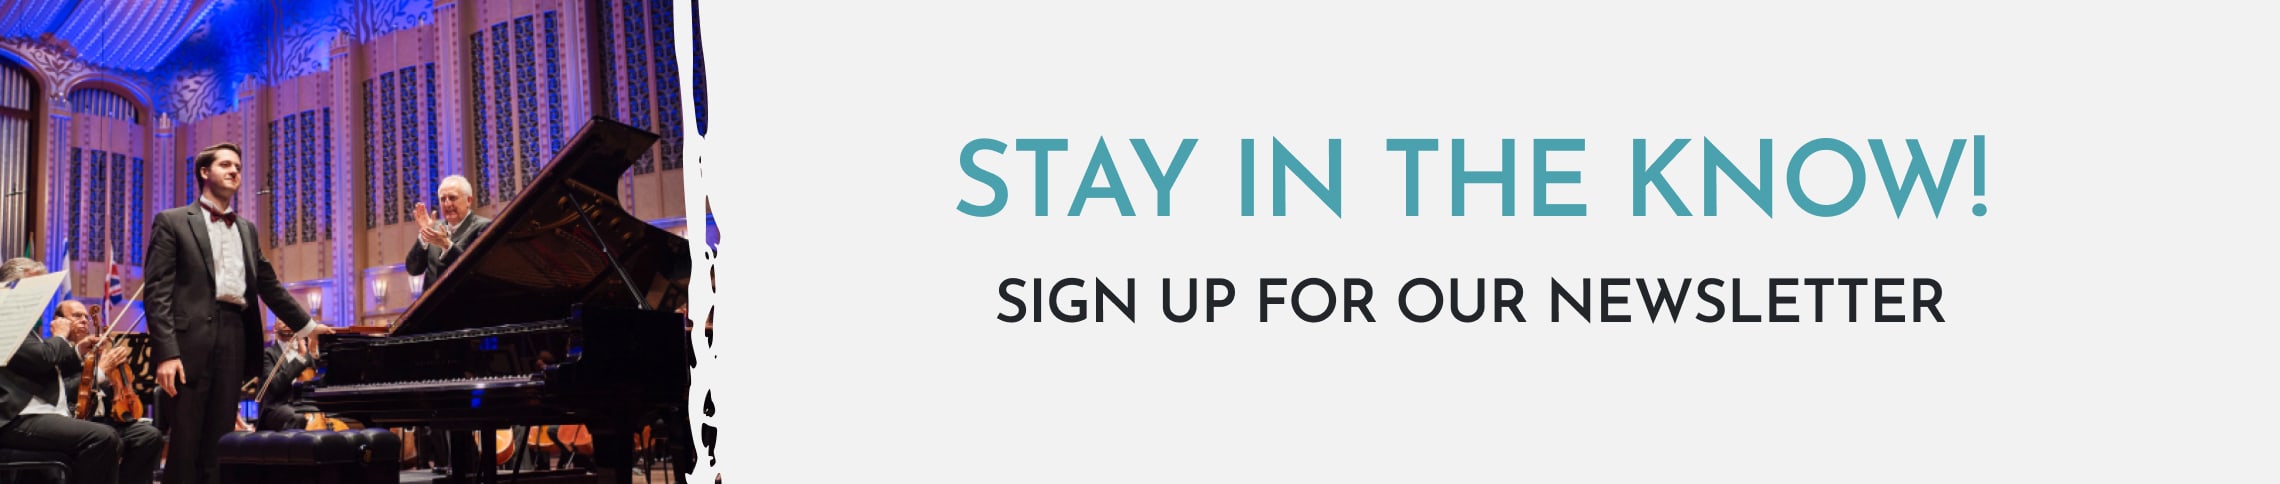 Stay in the know!! Sign up for our newsletter!